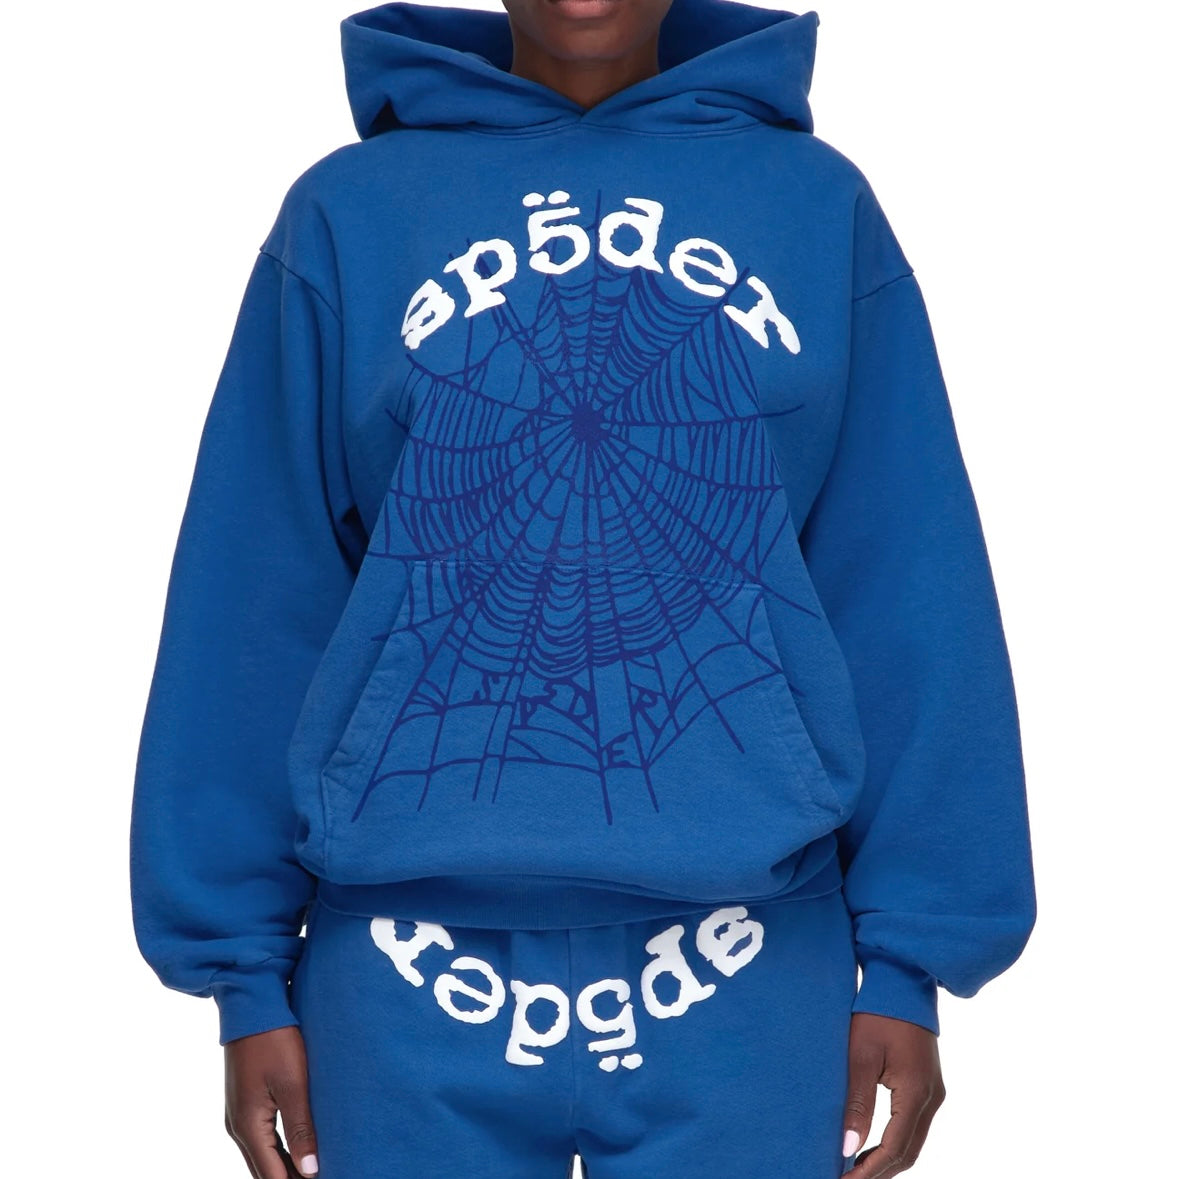 Sp5der Blue White Legacy Hoodie On Body Front Female